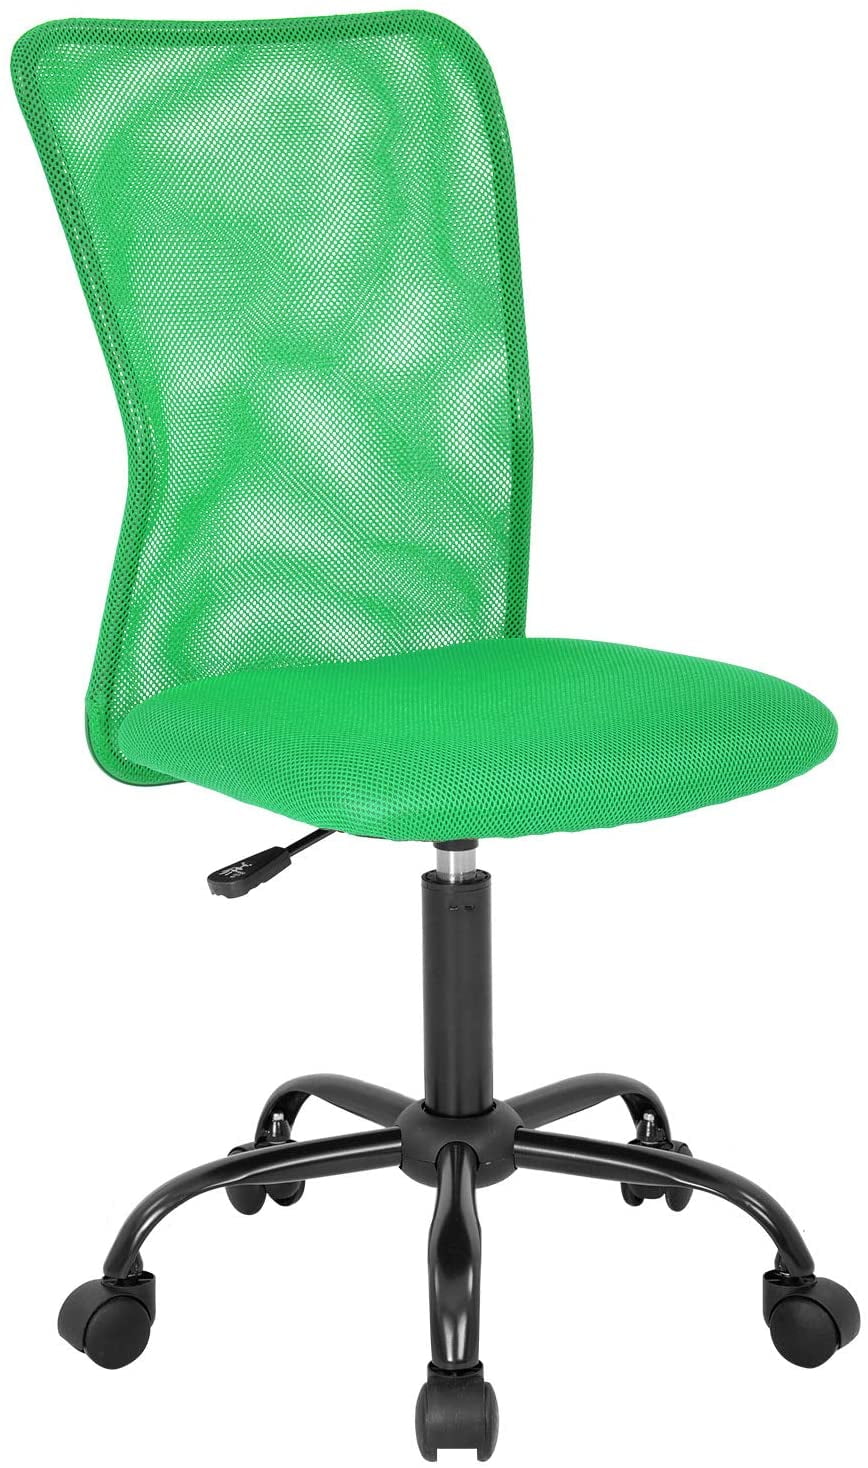 Bestoffice Mesh Office Chair Desk, Best Office Chairs Without Arms